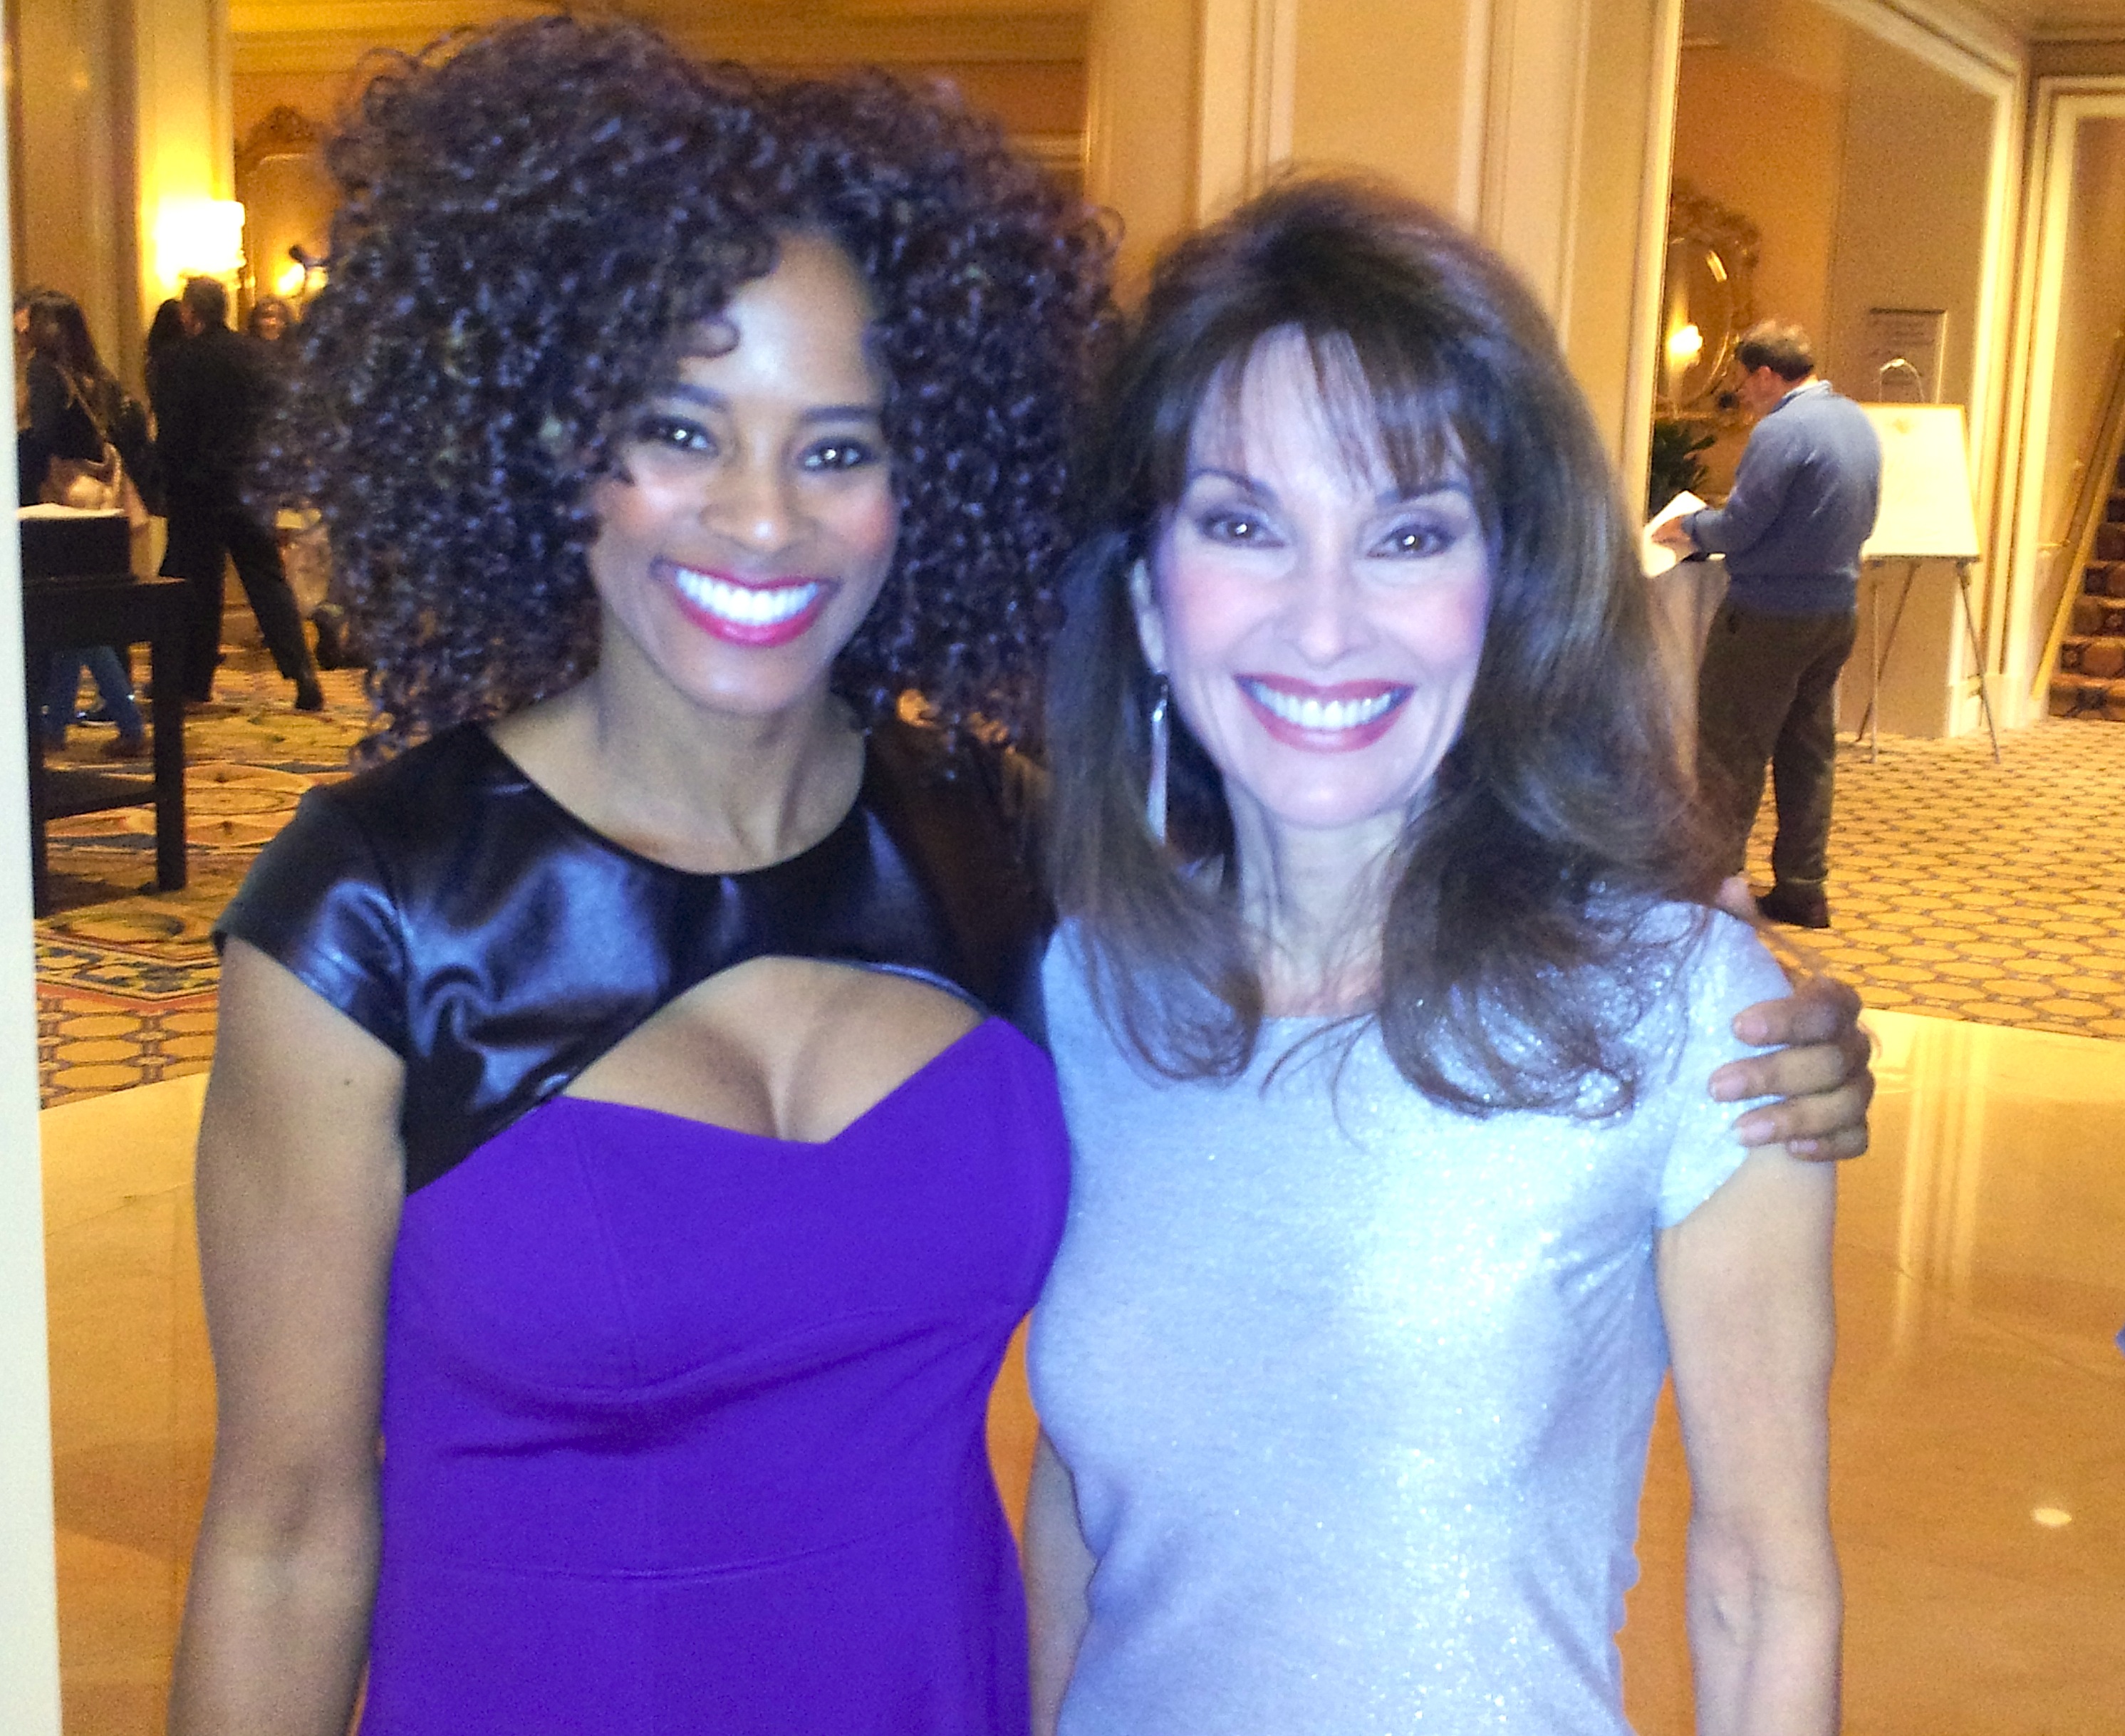 Susan Lucci and Germany Kent at the HBO Winter 2014 TCA Panel held at the Langham Huntington Hotel and Spa on Thursday (January 9) in Pasadena, Calif.